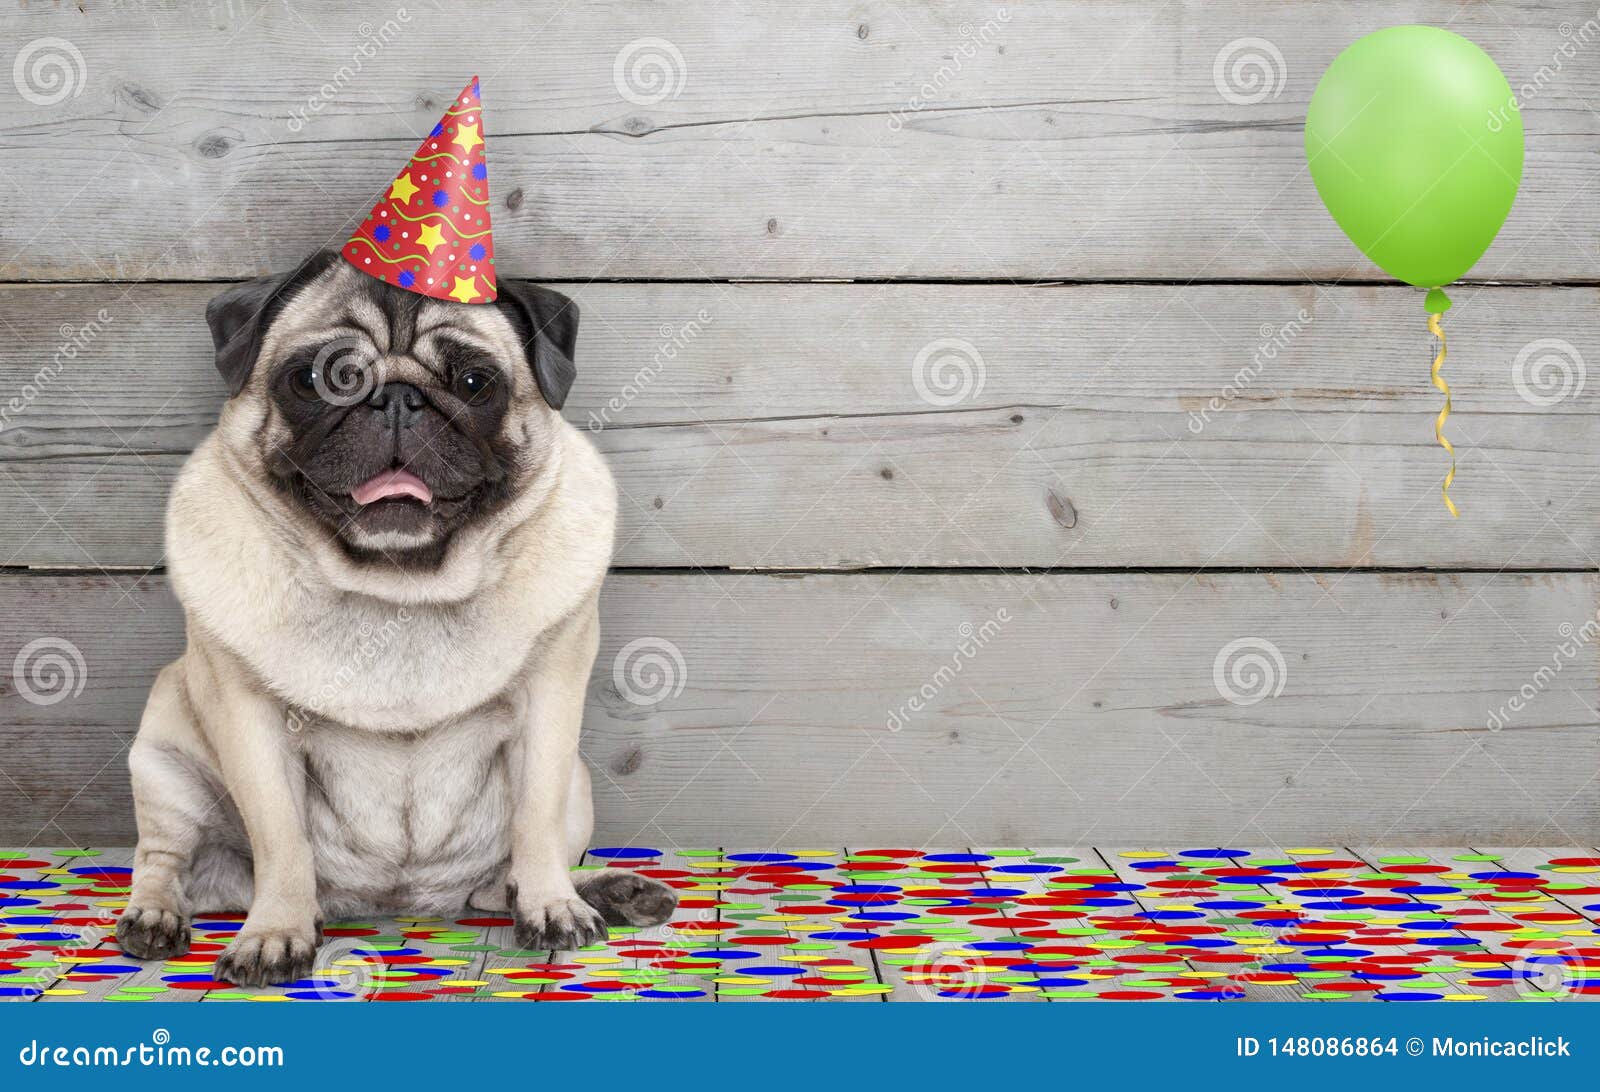 smiling birthday party pug dog, with confetti and balloon, sitting down celebrating, on old wooden backgrond